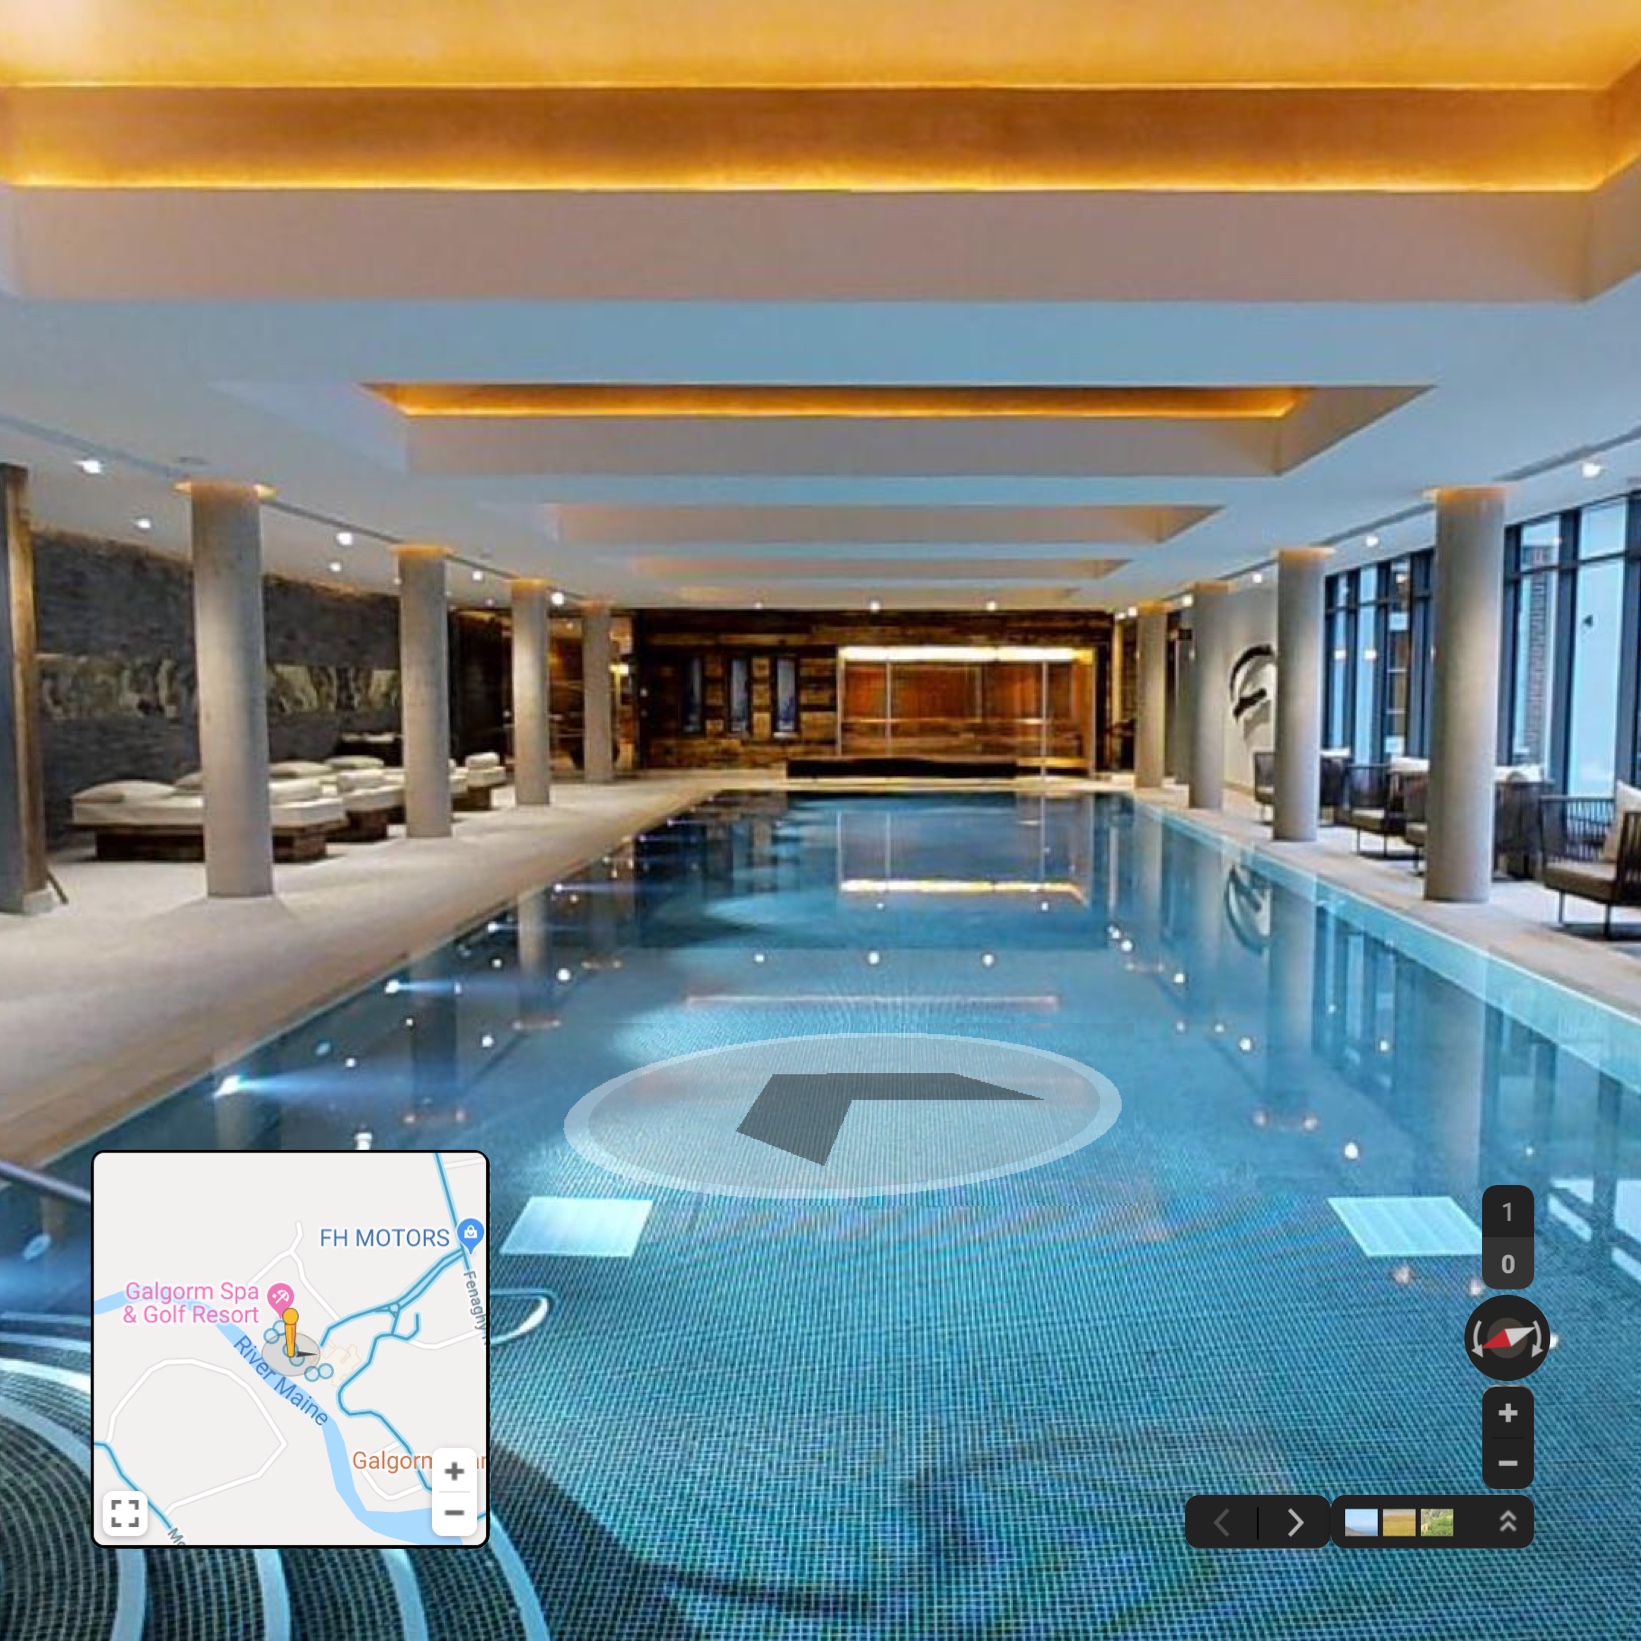 Immersed in a model of an indoor swimming pool using Google Street View